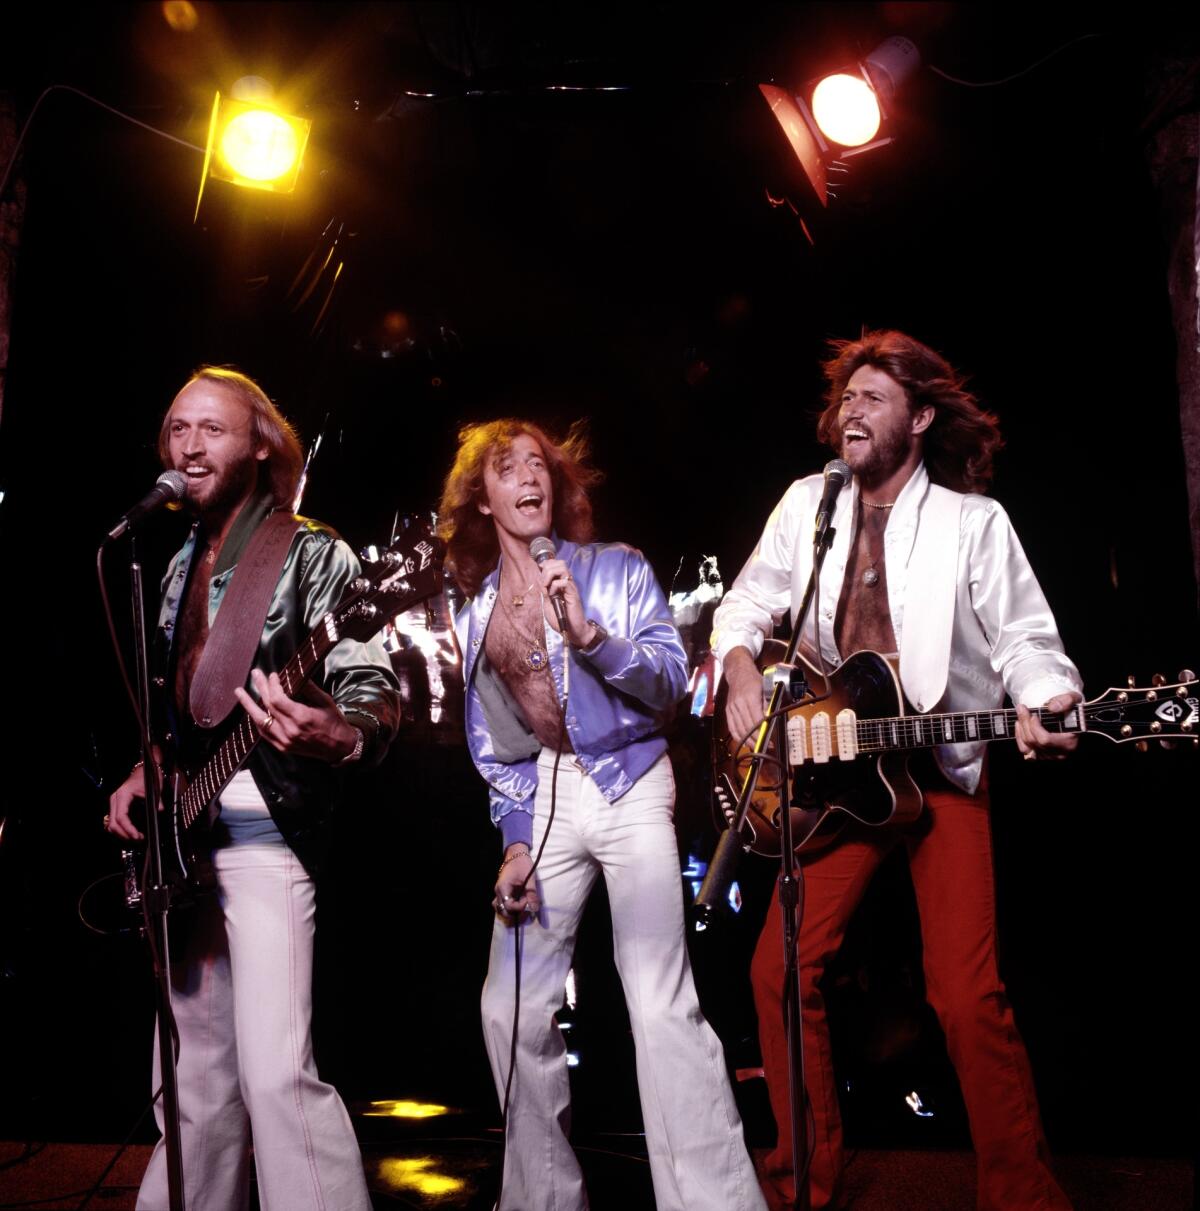 Maurice, Robin and Barry Gibb of the Bee Gees, performing onstage in 1979.